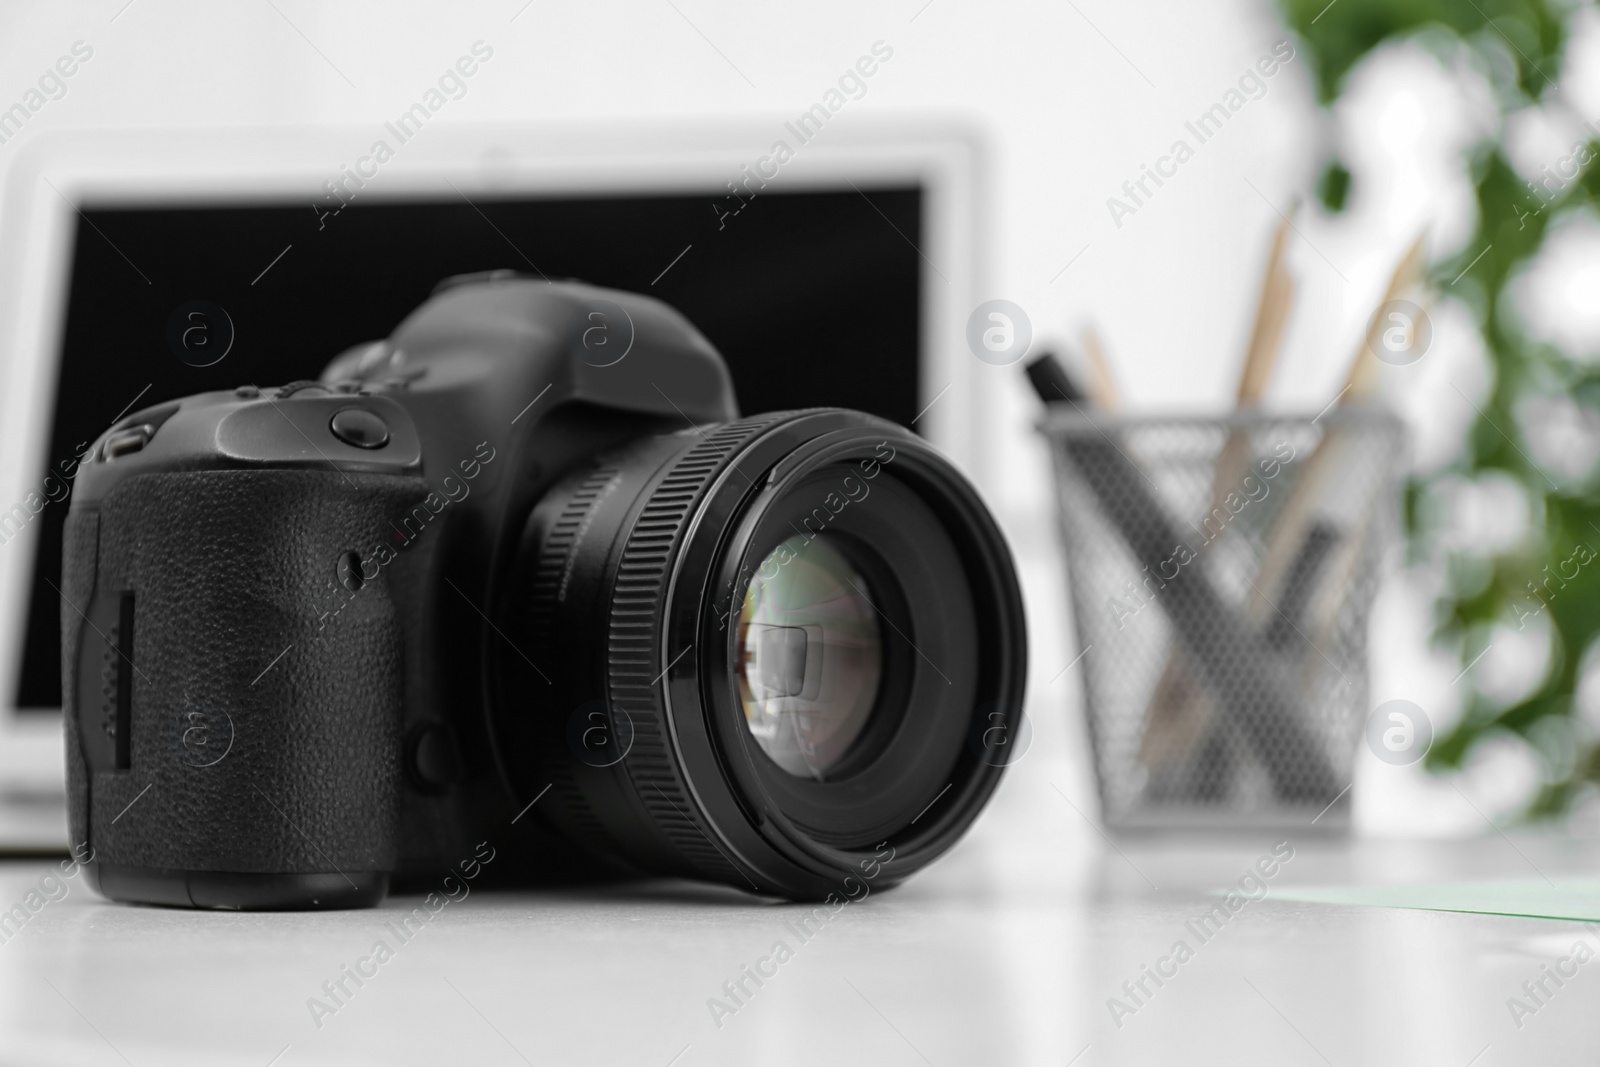 Photo of Digital camera on white table. Equipment for professional photographer